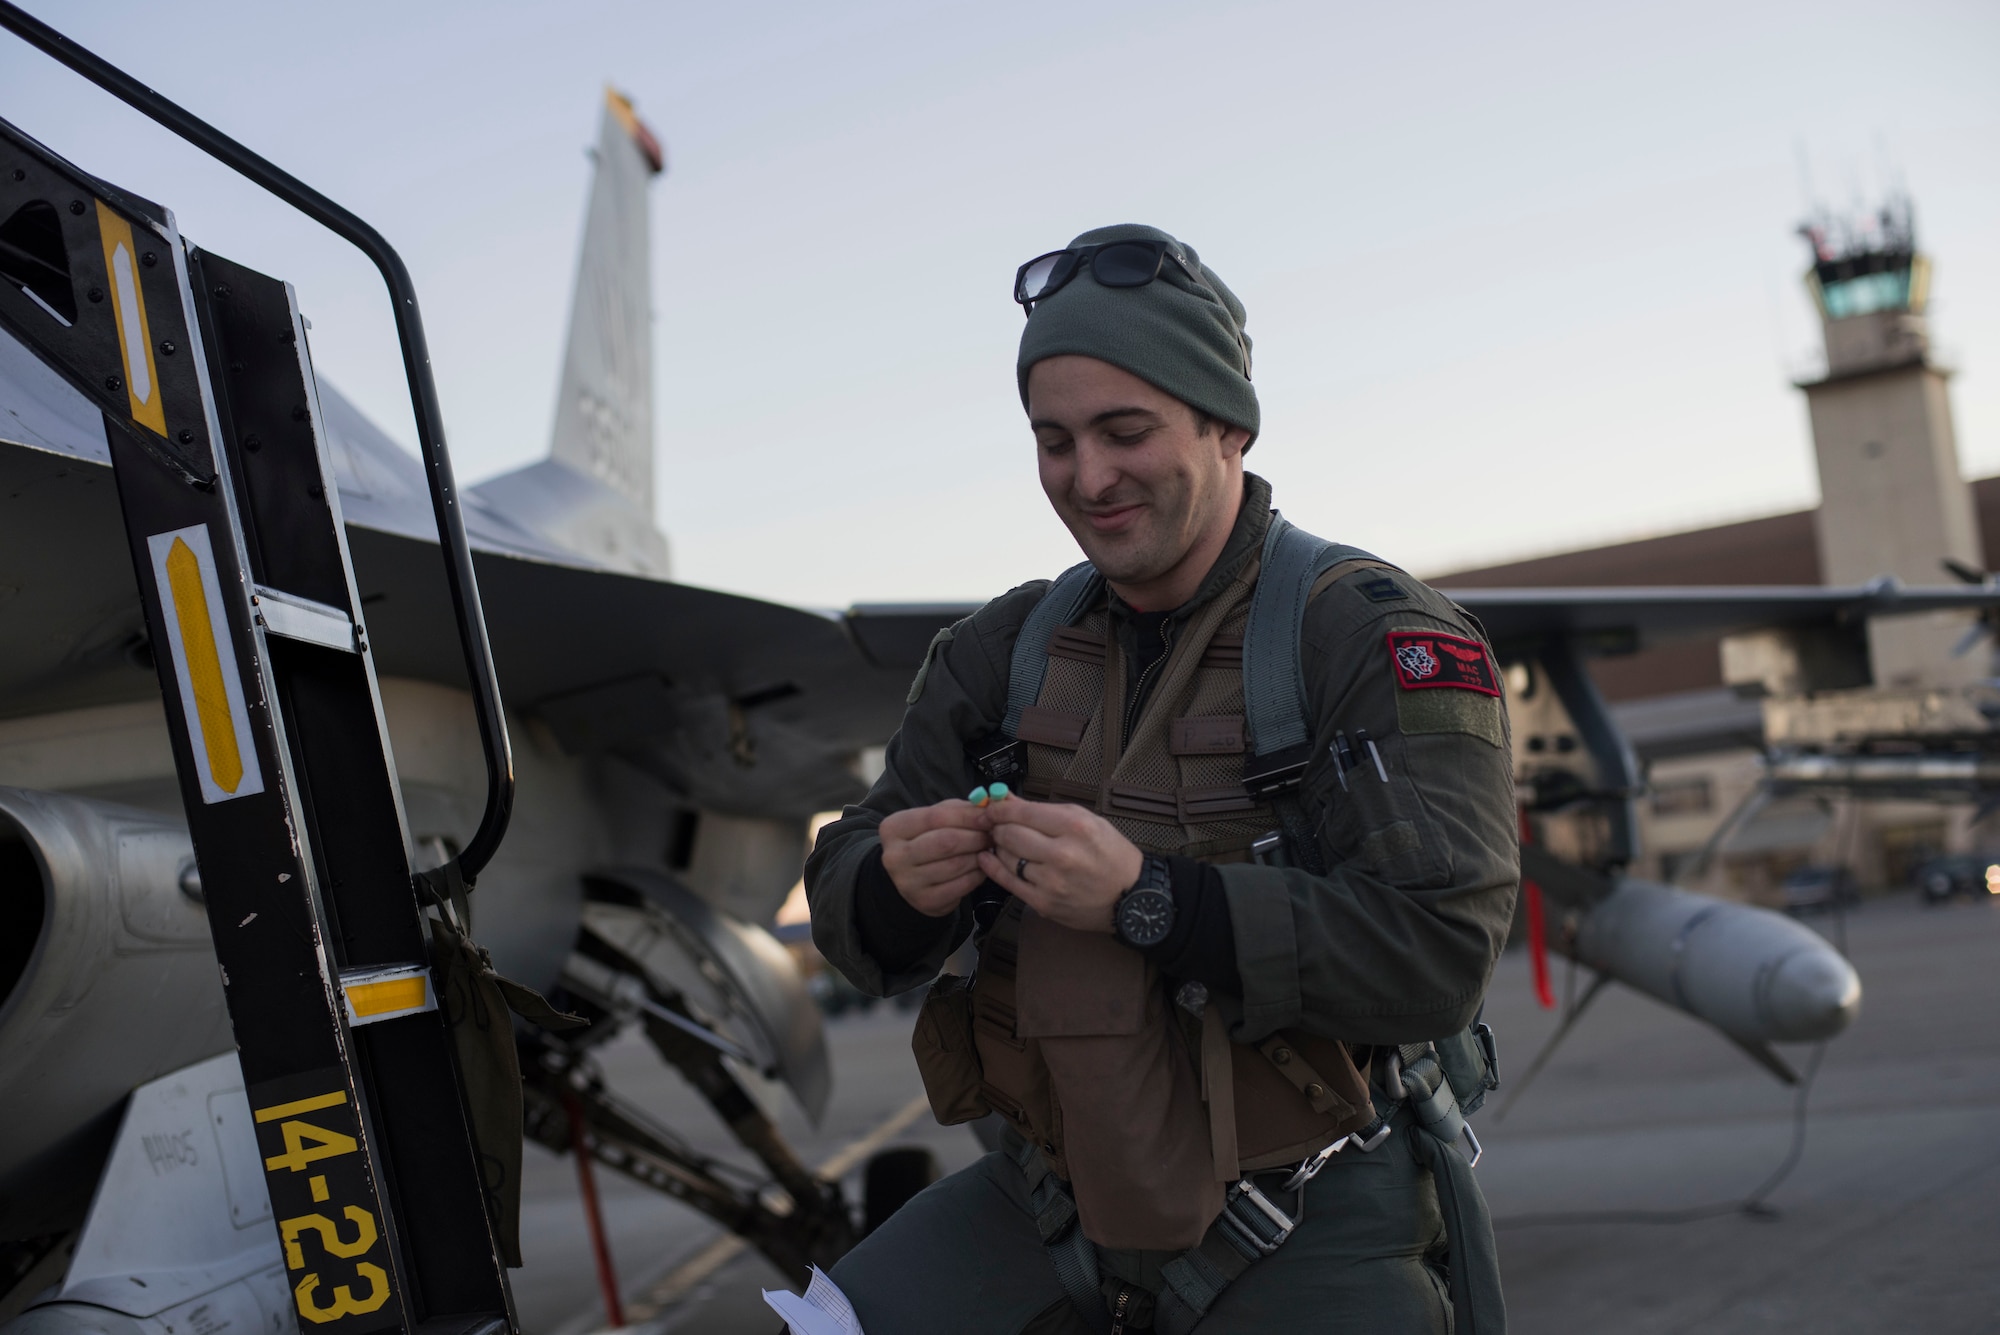 U.S. Air Force Capt. Mark Onorato, the 13th Fighter Squadron activity security manager, inspects his ear protection before climbing into an F-16 Fighting Falcon during Exercise Red Flag-Alaska 19-1, at Eielson Air Force Base, Alaska, Oct. 6, 2018. RF-A 19-1, held Oct. 4 to 19, is slated to train more than 1,000 personnel and 60 aircraft in a simulated air combat environment optimizing personnel's abilities and honing acquired skill sets. (U.S. Air Force photo by Airman 1st Class Collette Brooks)